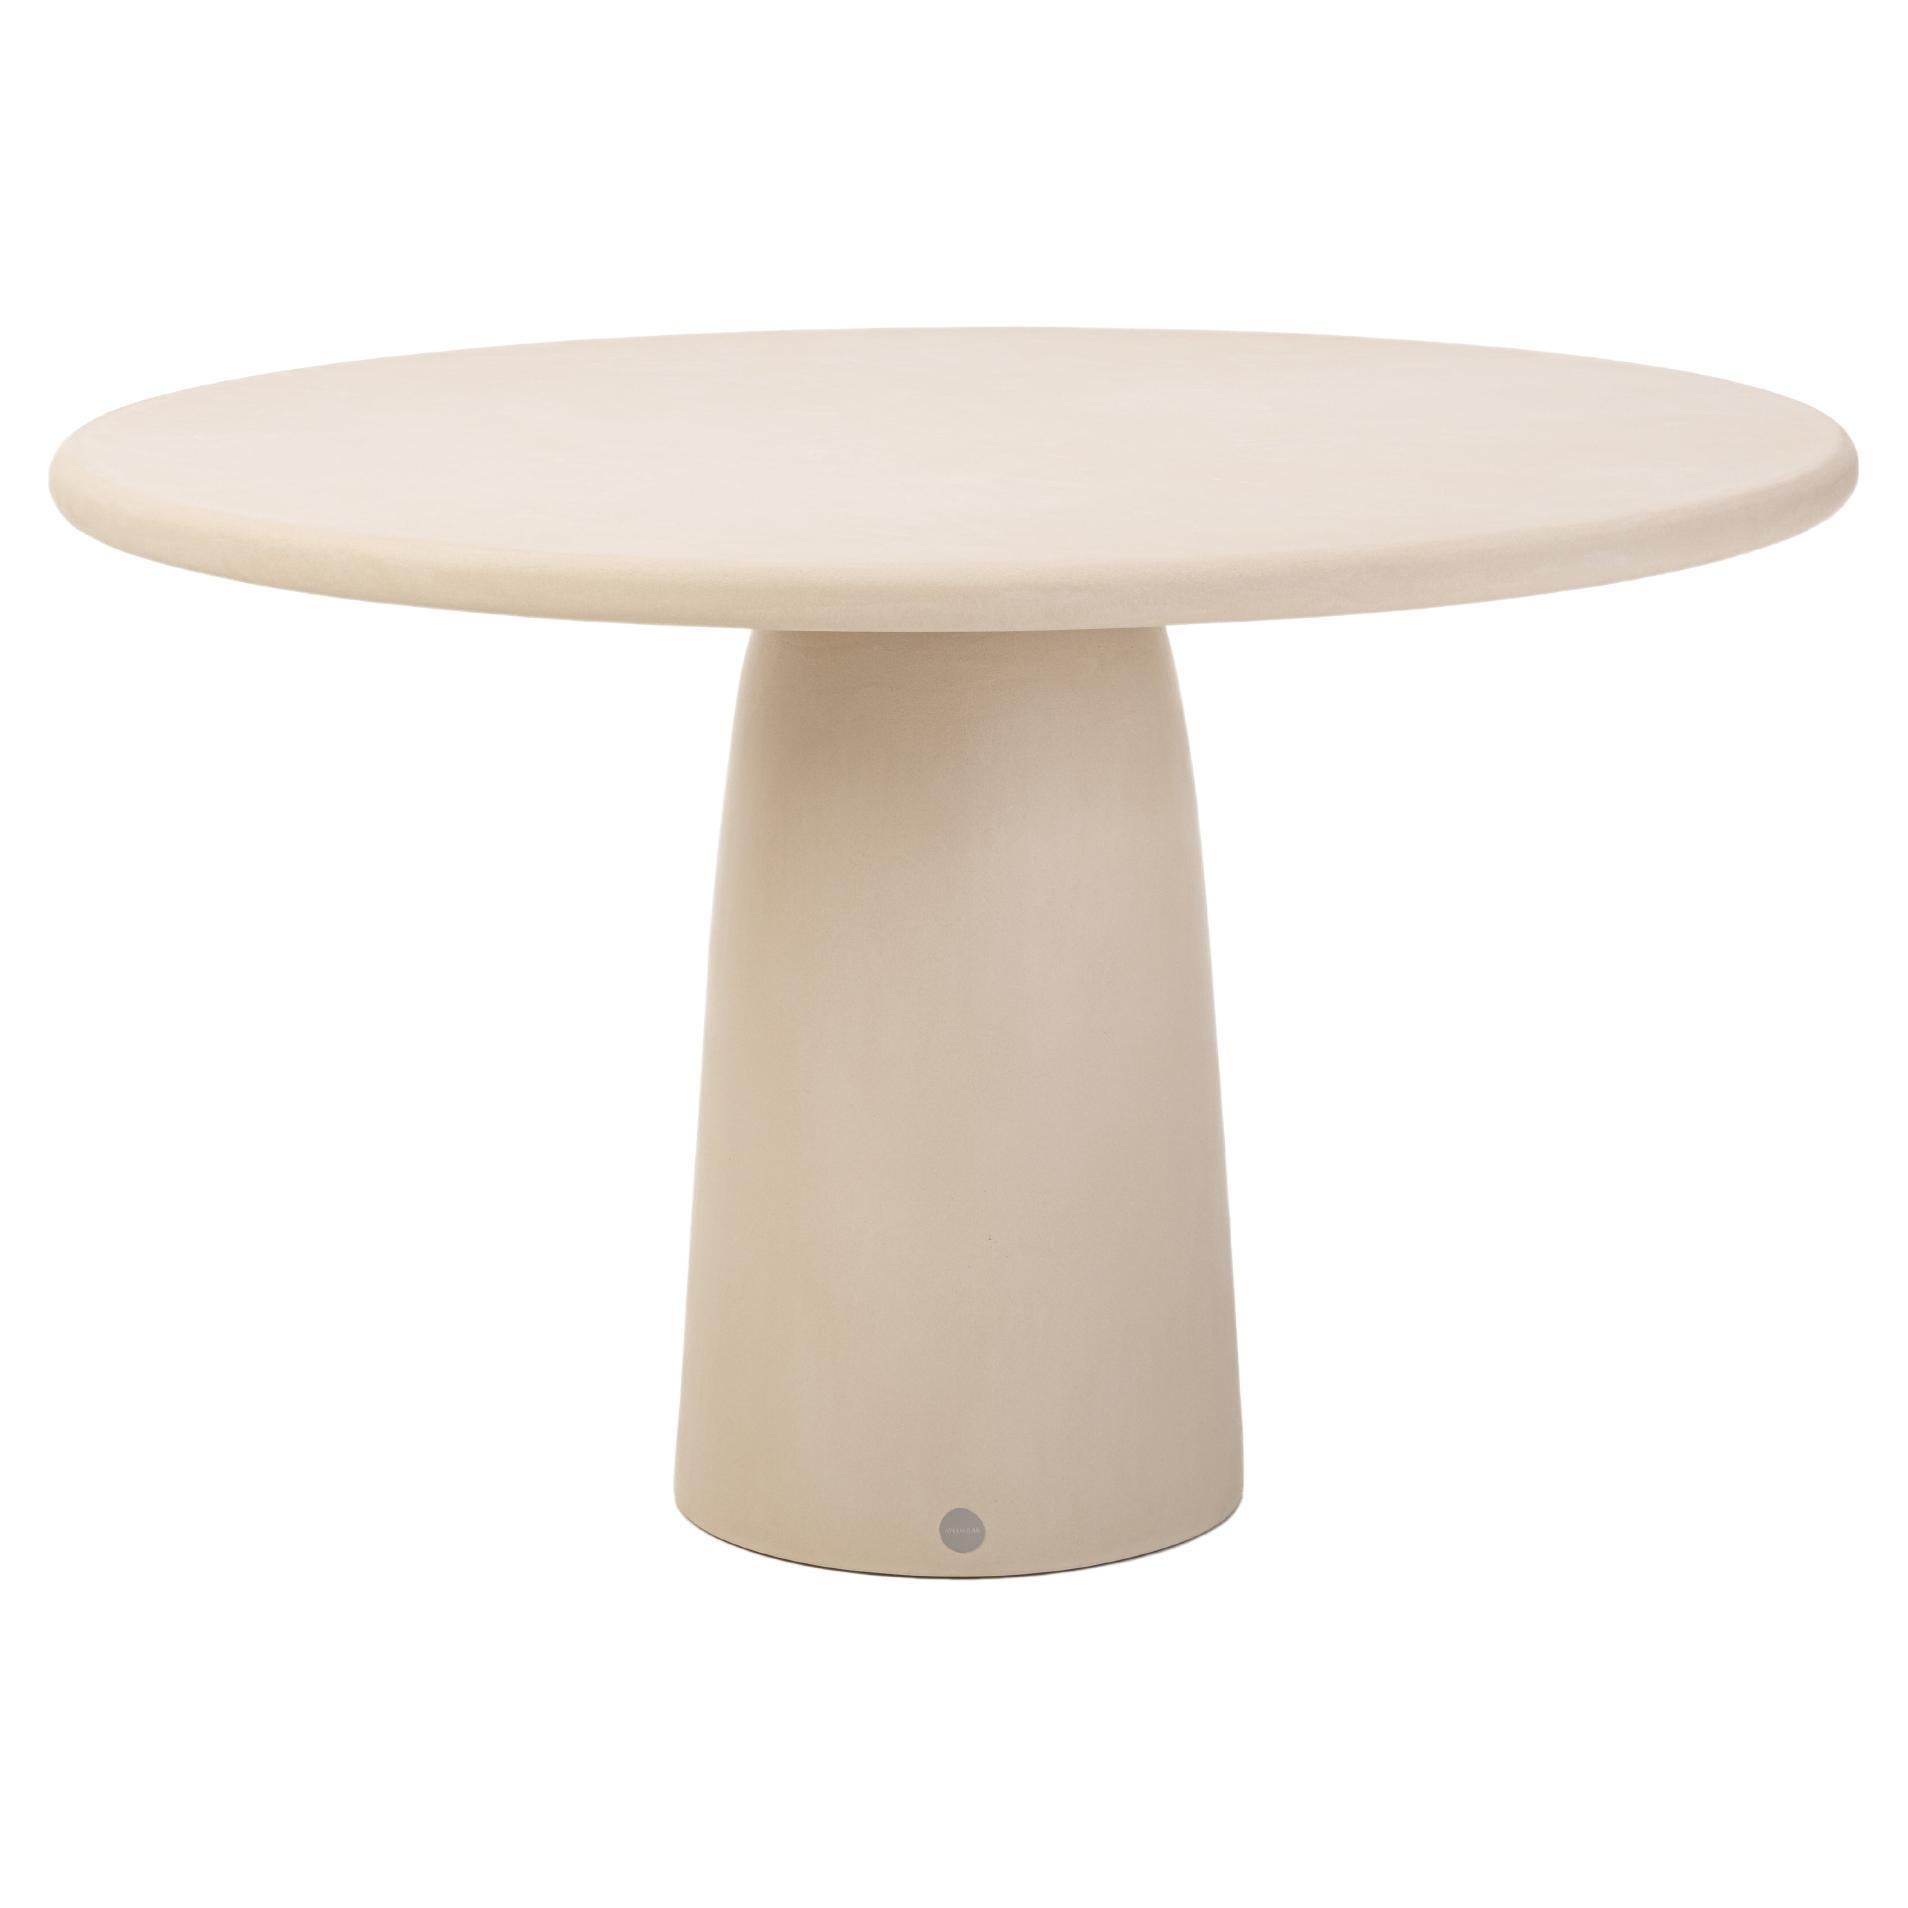 Round Natural Plaster Dining Table "Menhir" 120 by Isabelle Beaumont For Sale